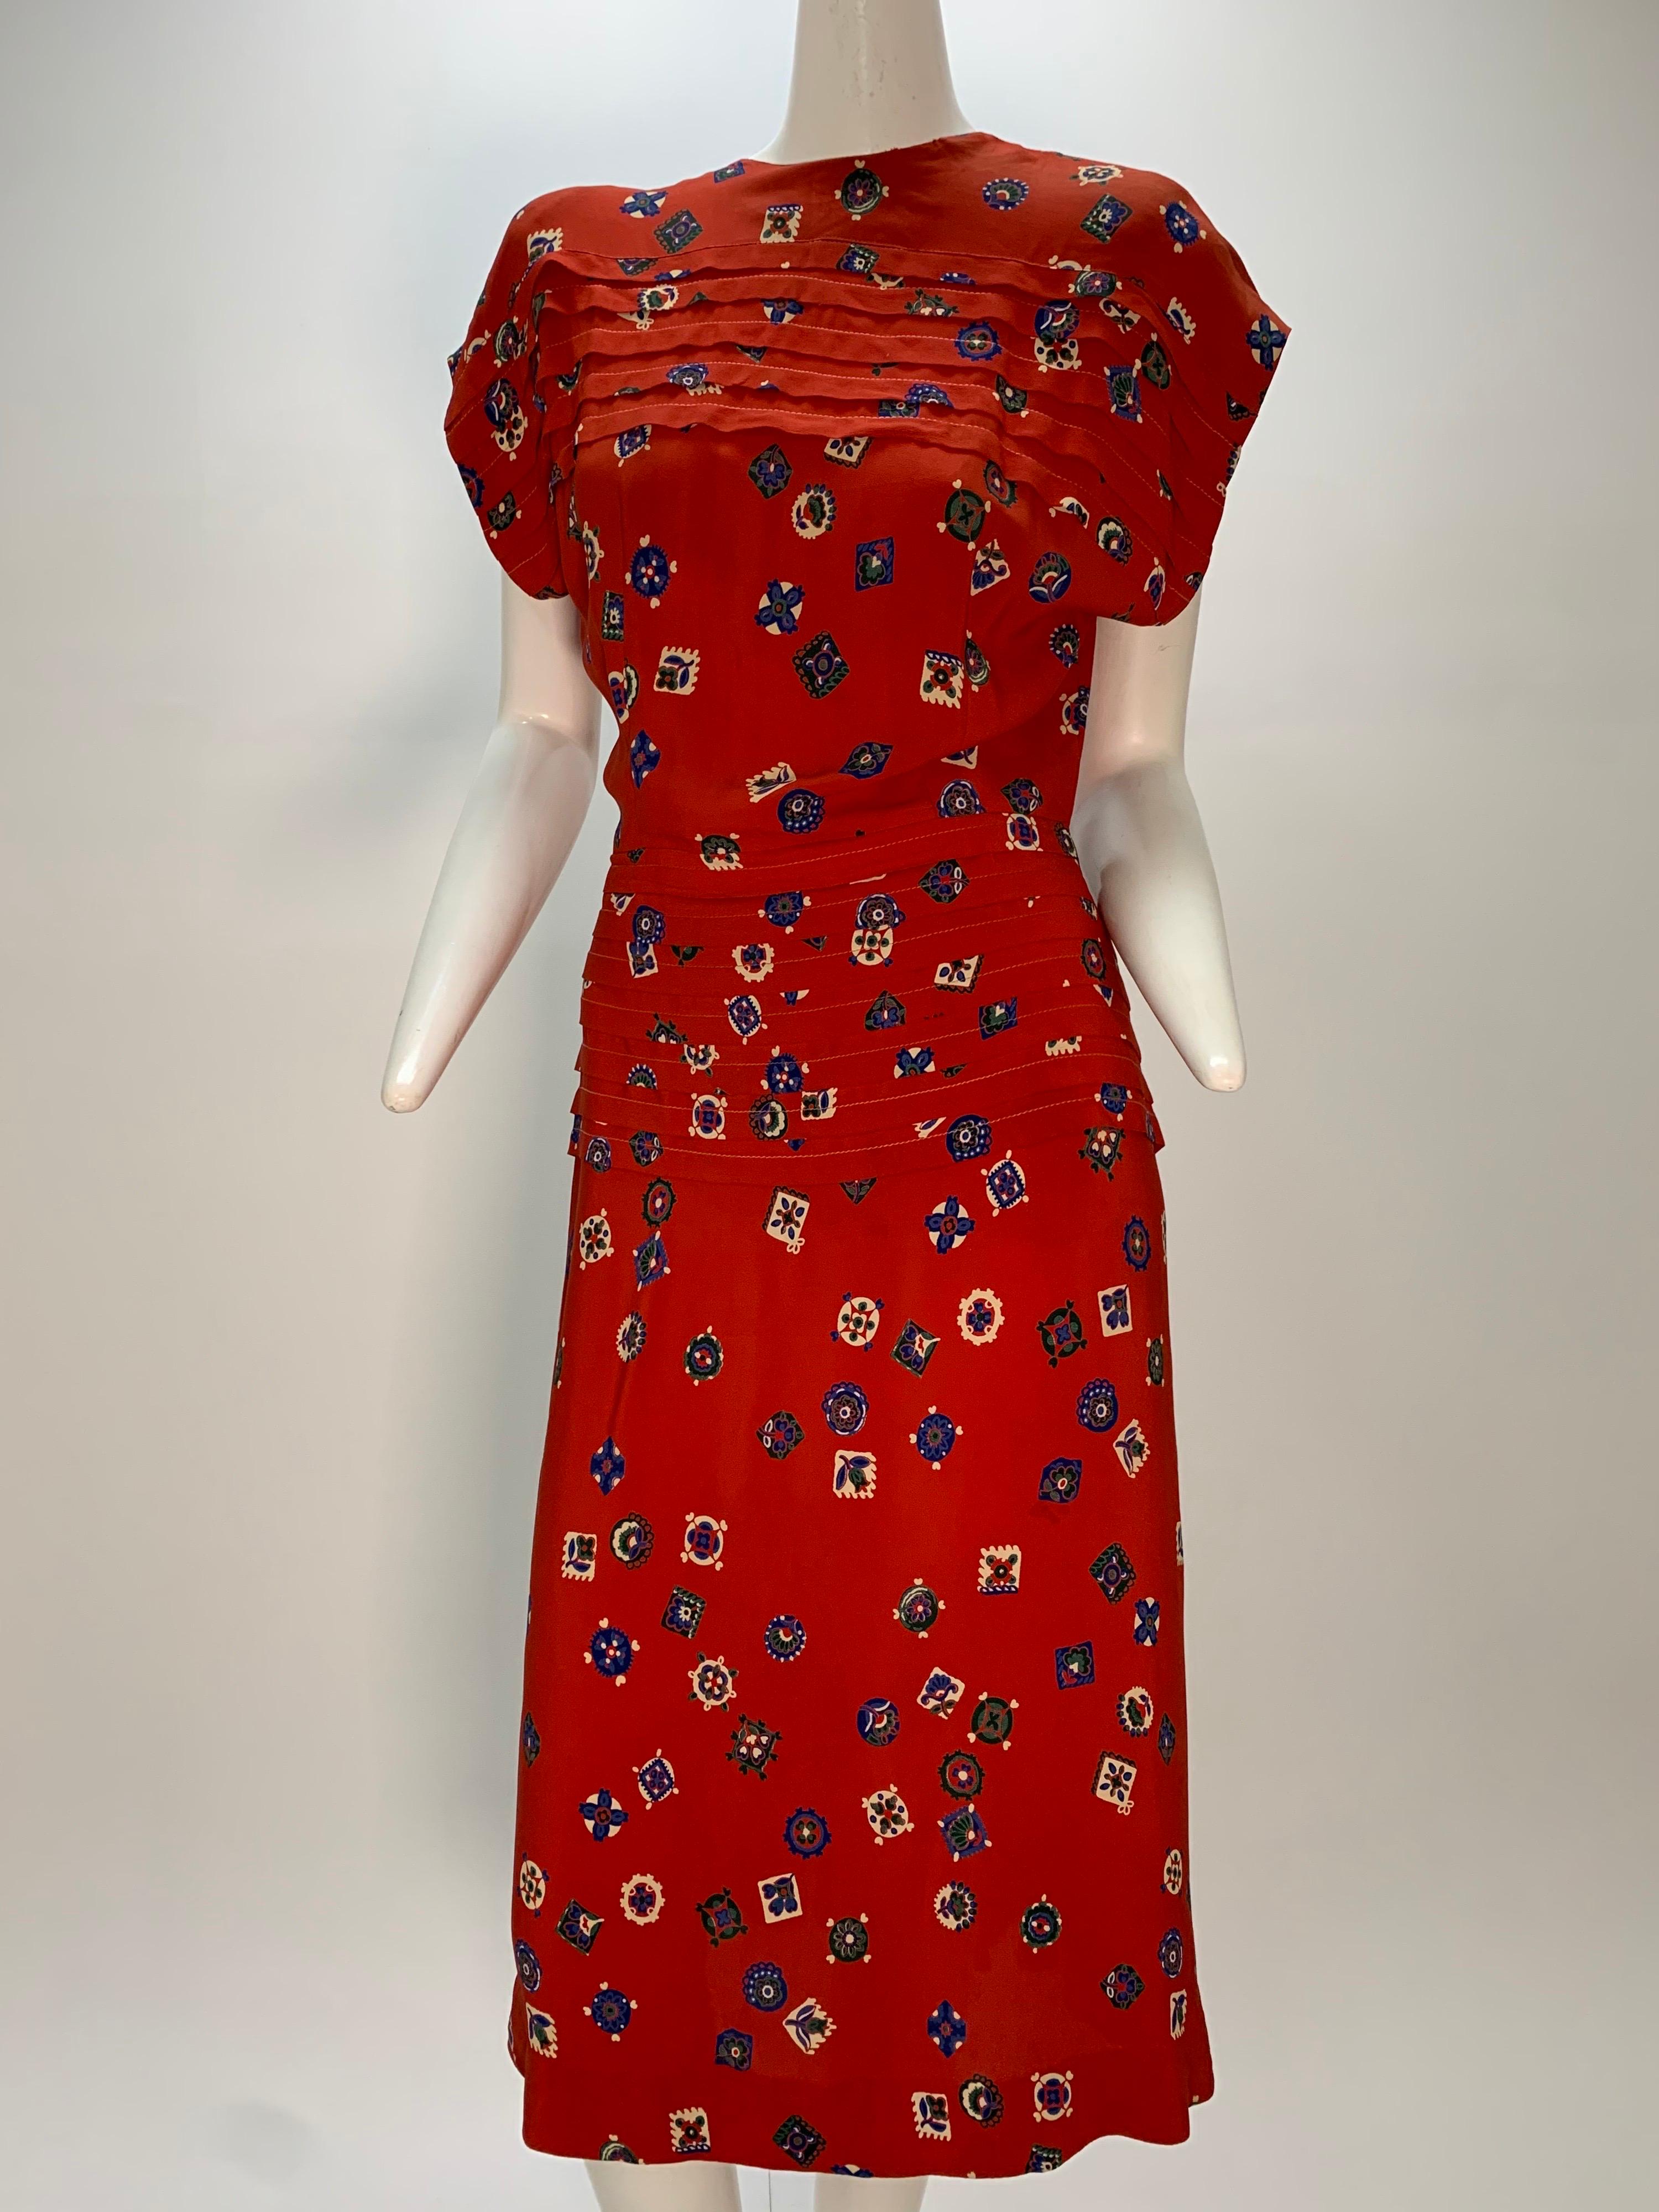 A sweet 1940s red crepe novelty calico-style print rayon swing dress with sewn-down pleated peplum, drop-shoulder and flared skirt back details. Original shoulder pads. Zip at back. Mid-calf length. 